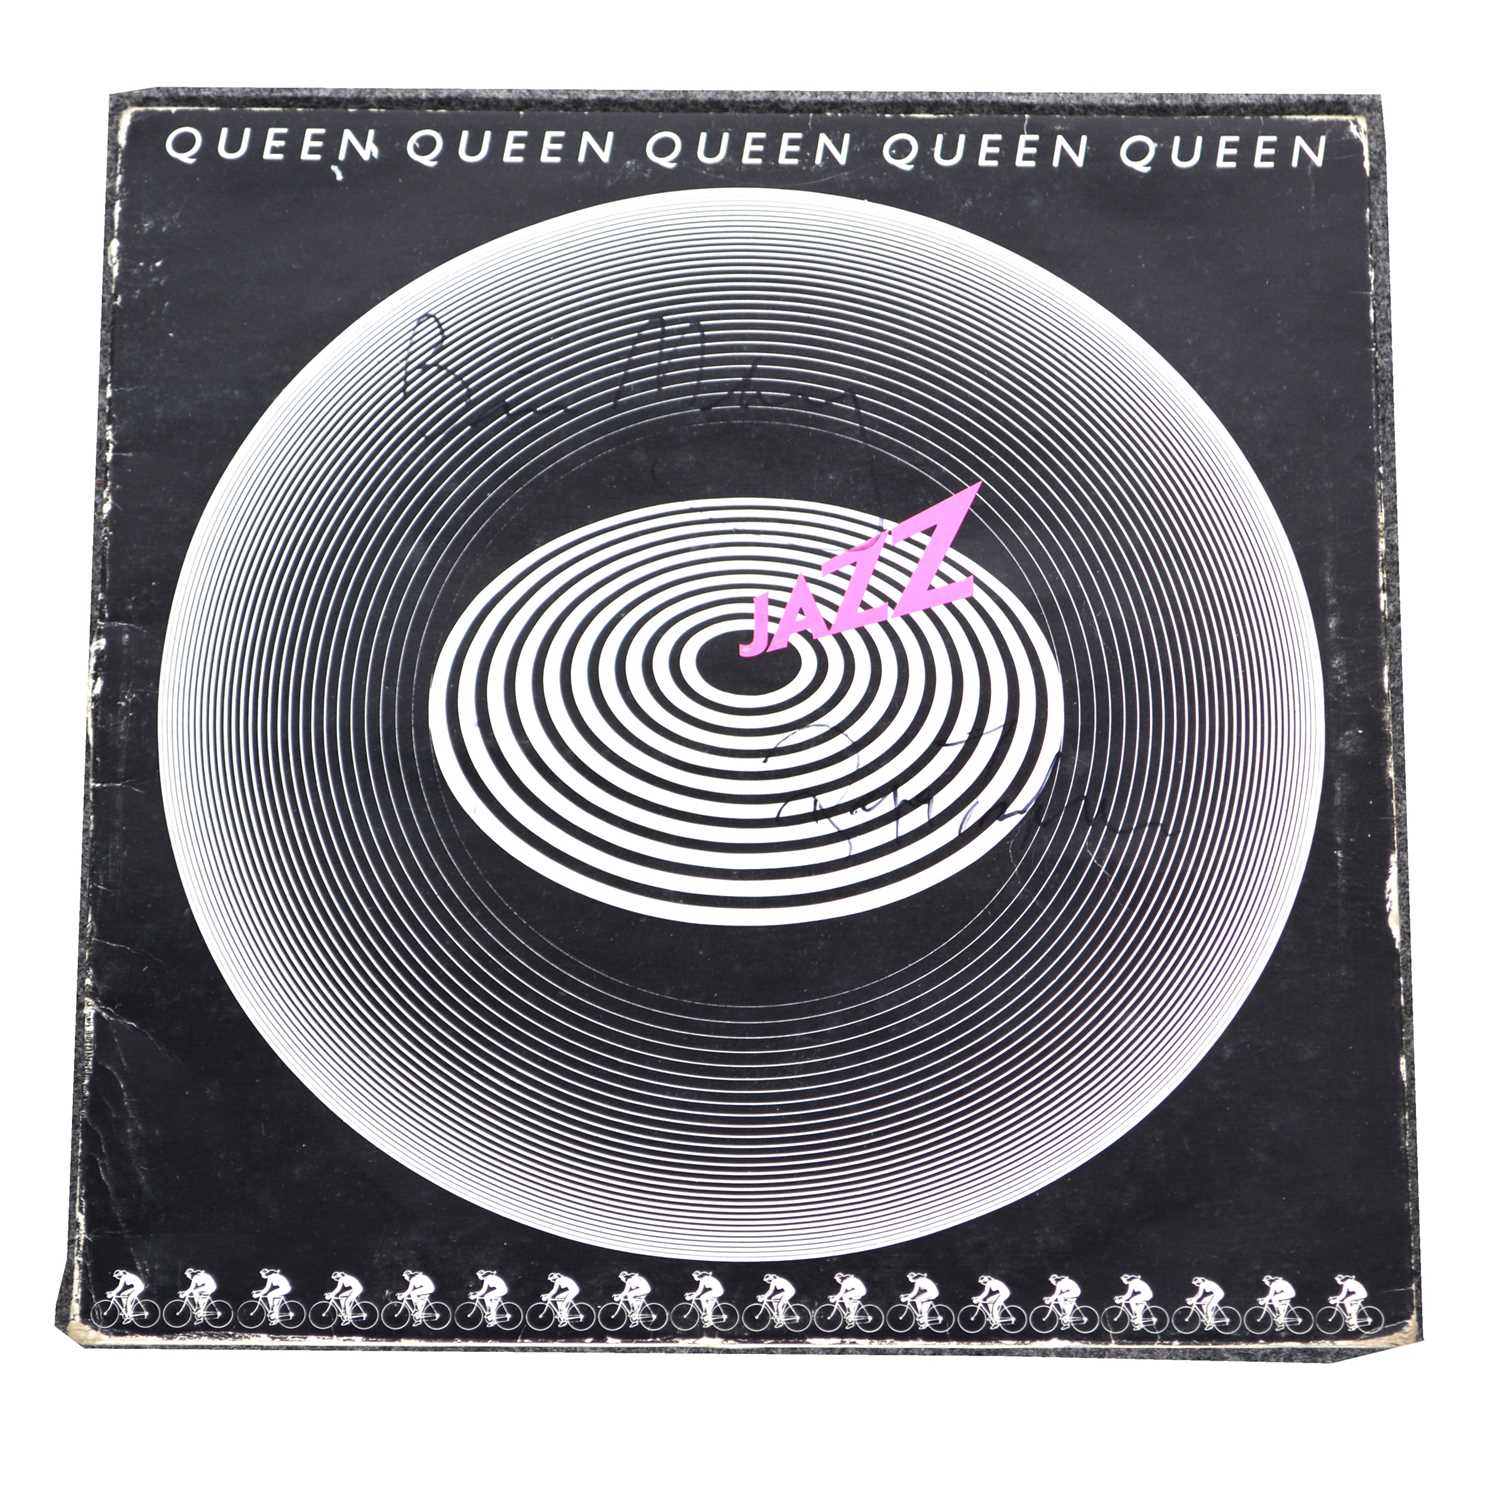 Lot 20 - Queen; Jazz LP vinyl record, appears to be signed by Brian May and Roger Taylor.